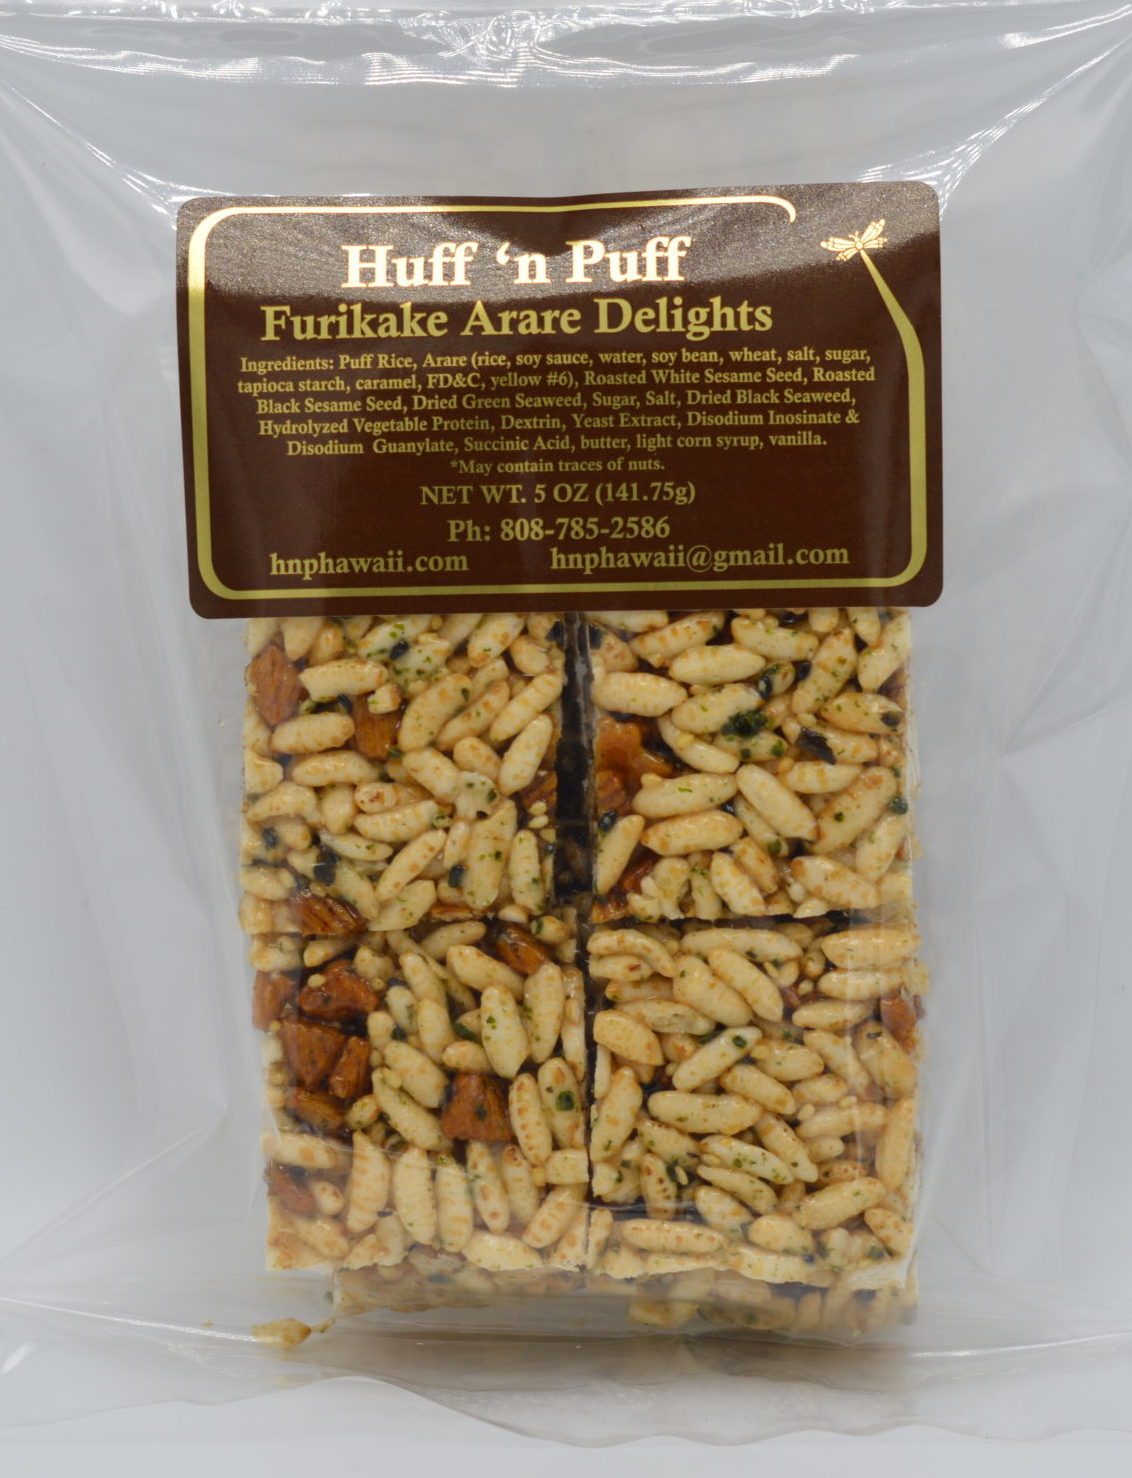 (NEW) Huff N Puff Furikake Arare Delights - Wholesale Unlimited Inc.